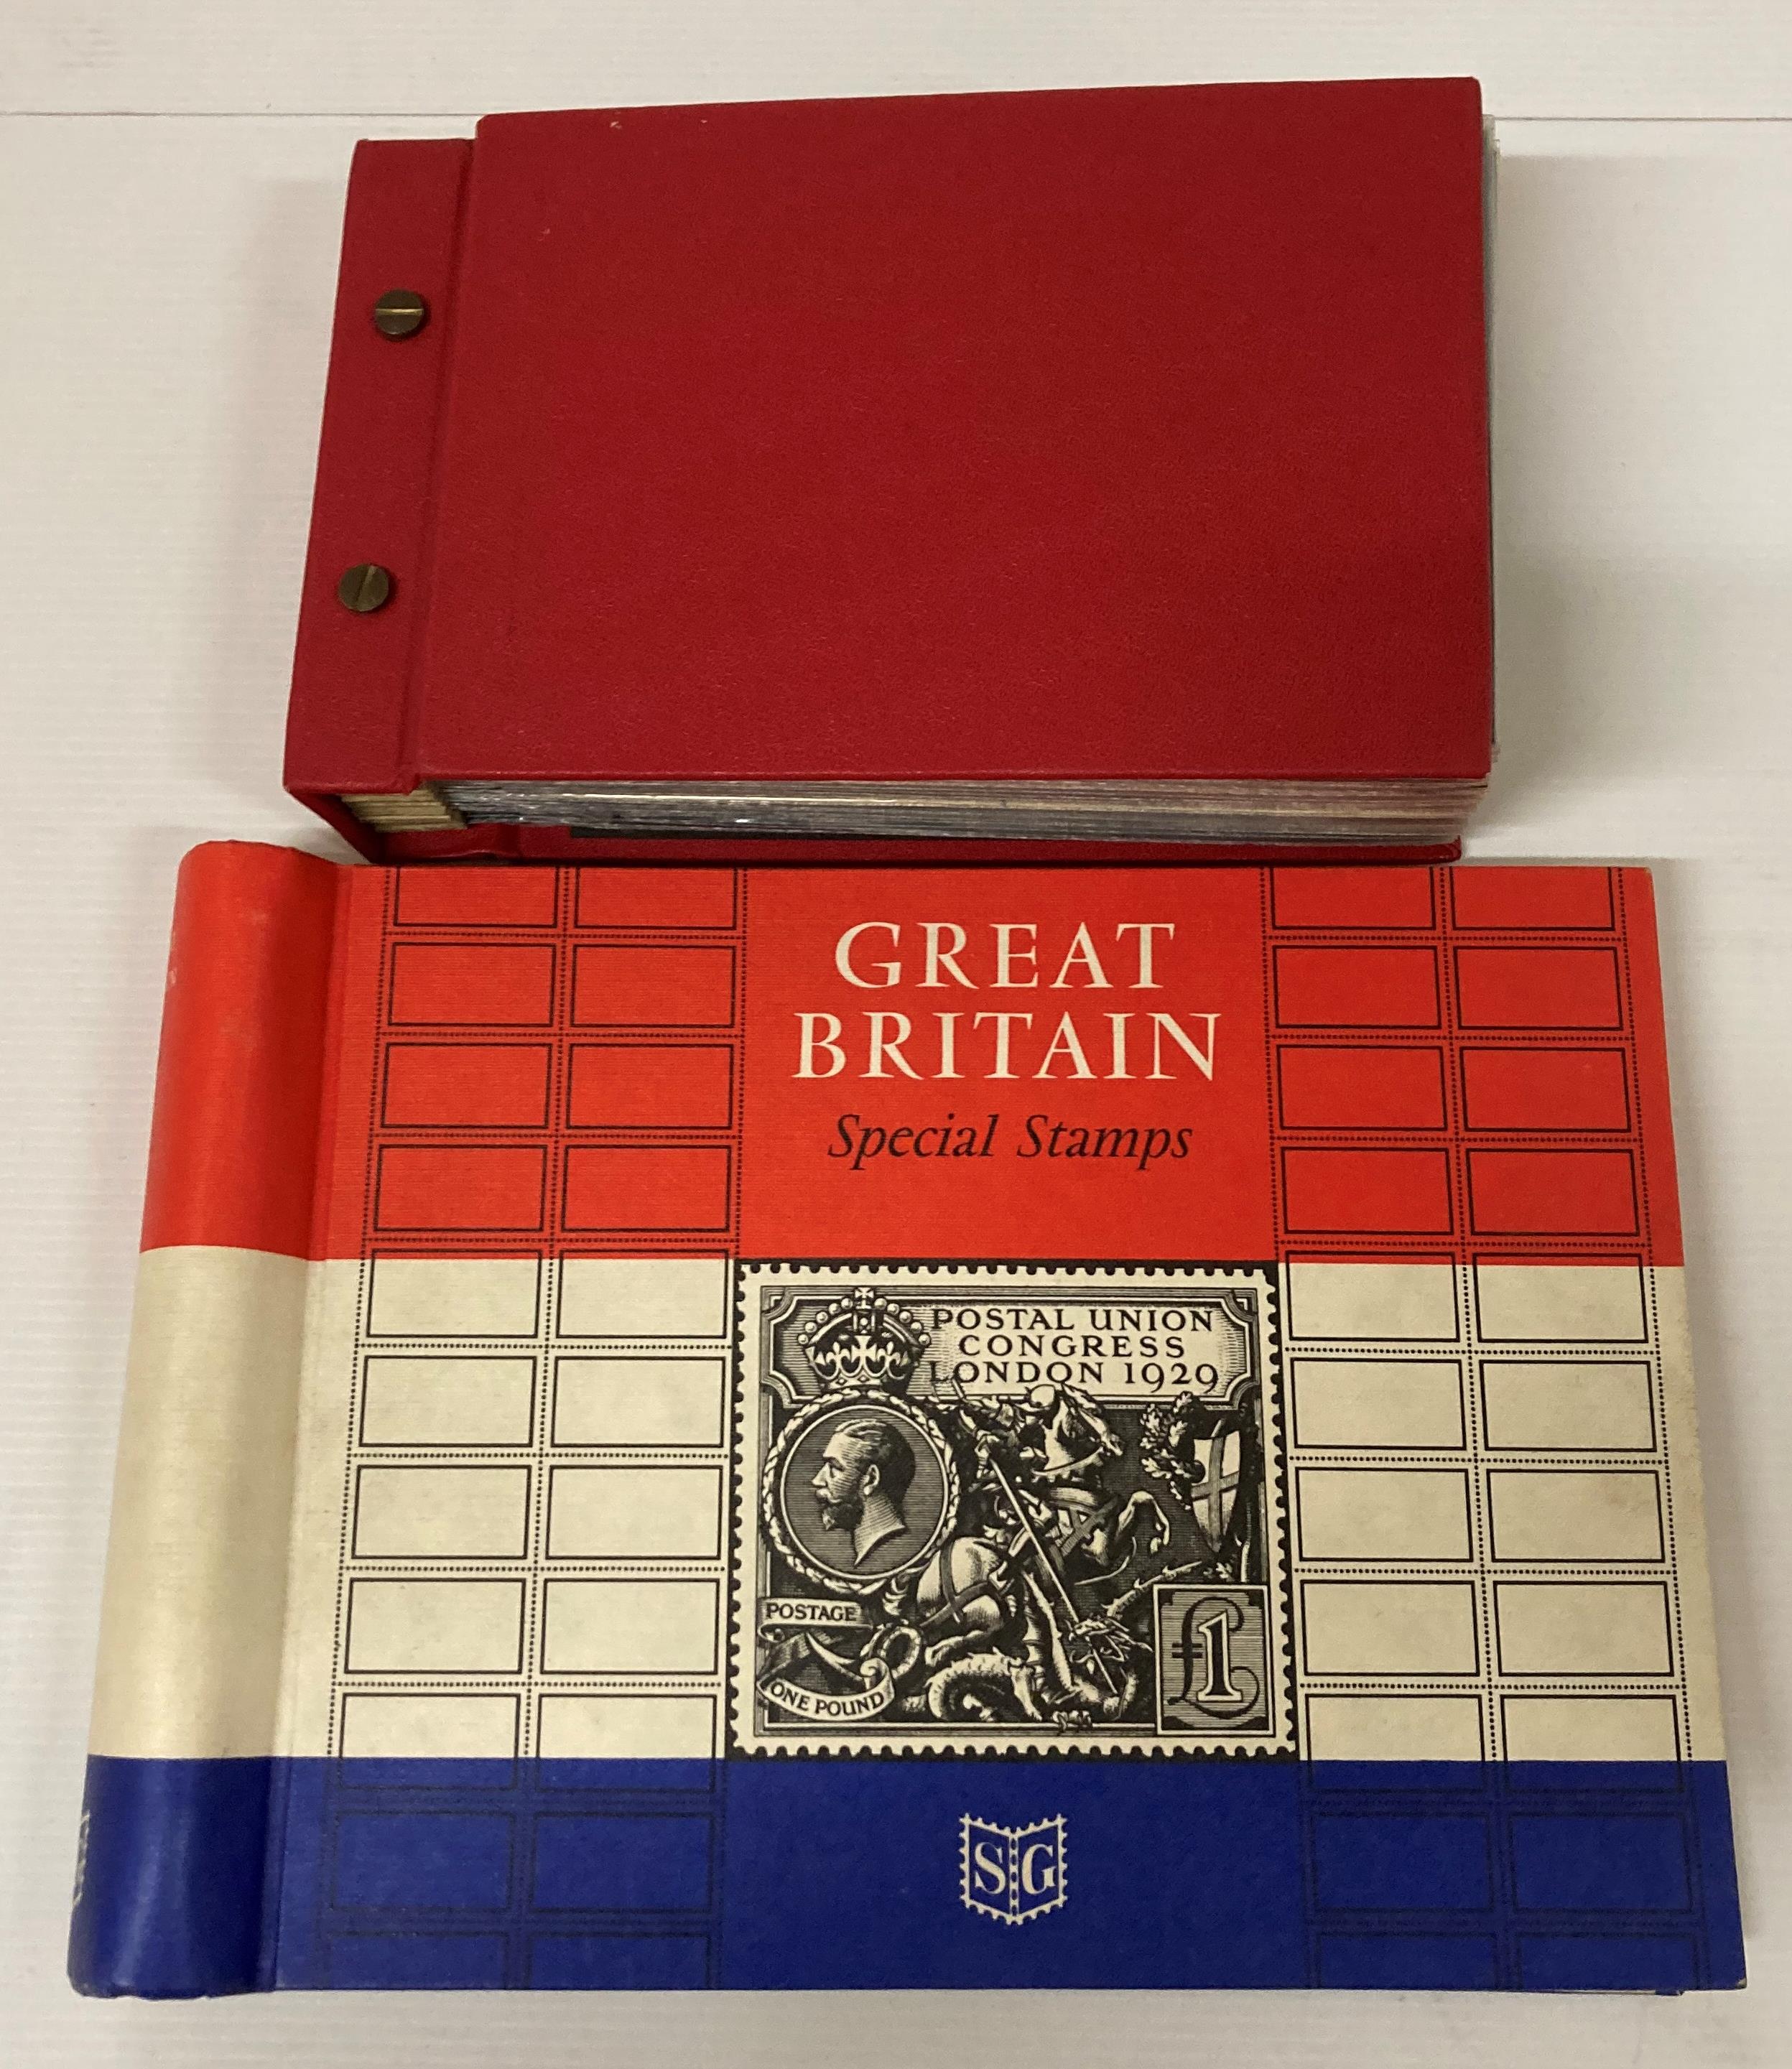 A Great Britain Special Stamp Album featuring Special British Stamps from the British Empire - Image 5 of 5